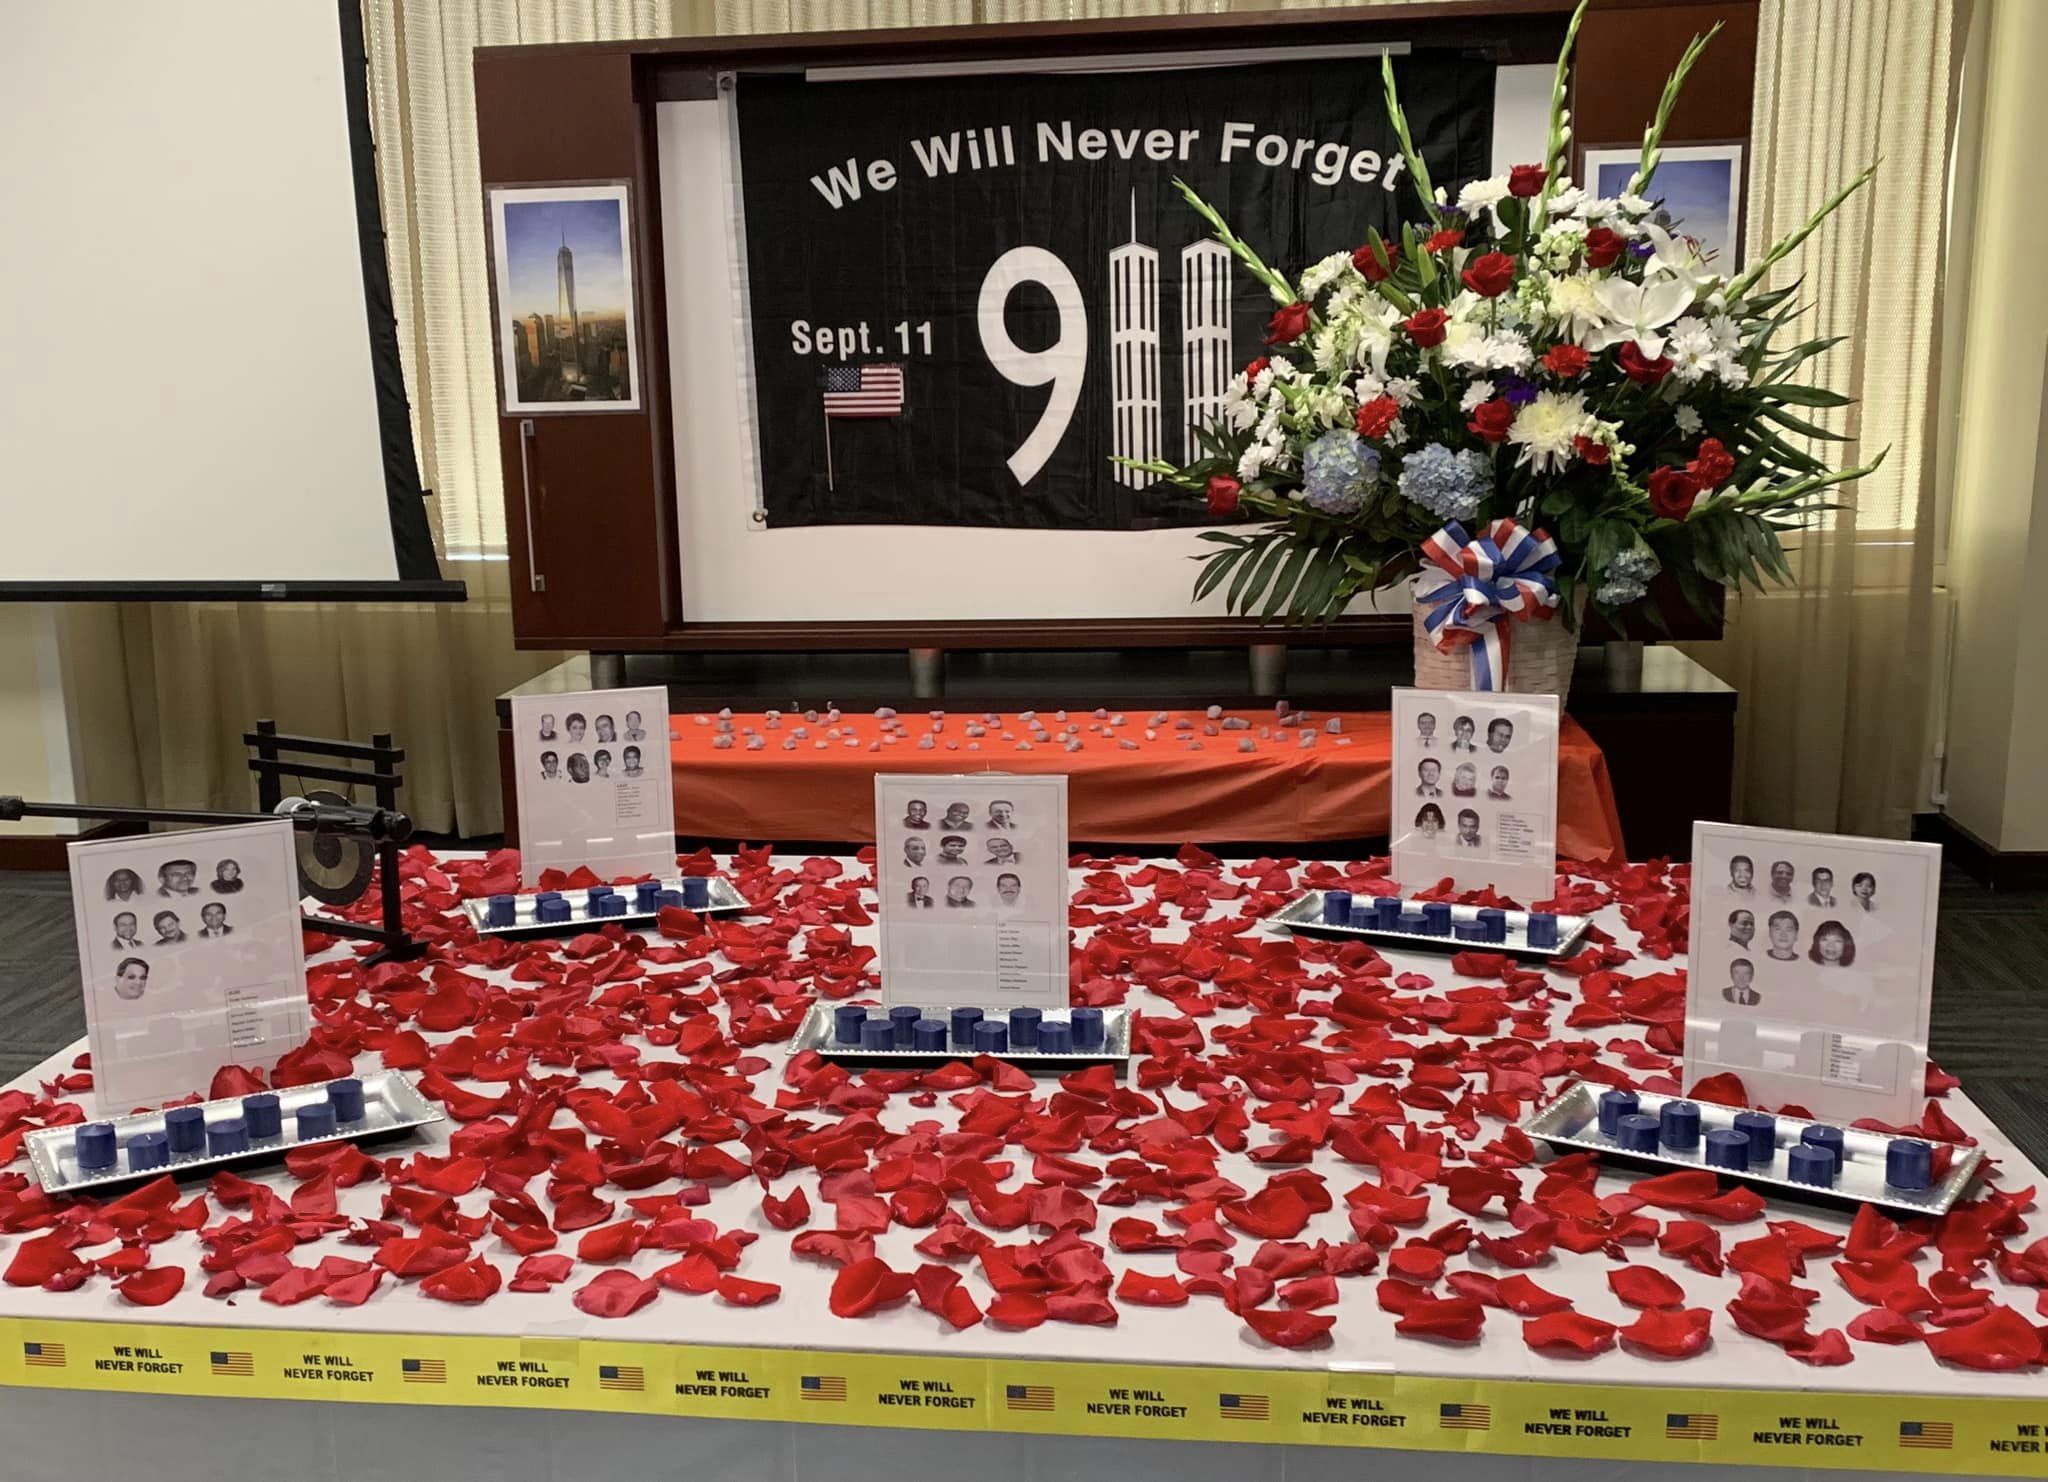 A display in memory of Tax and Finance workers who lost their lives on September 11, 2001.